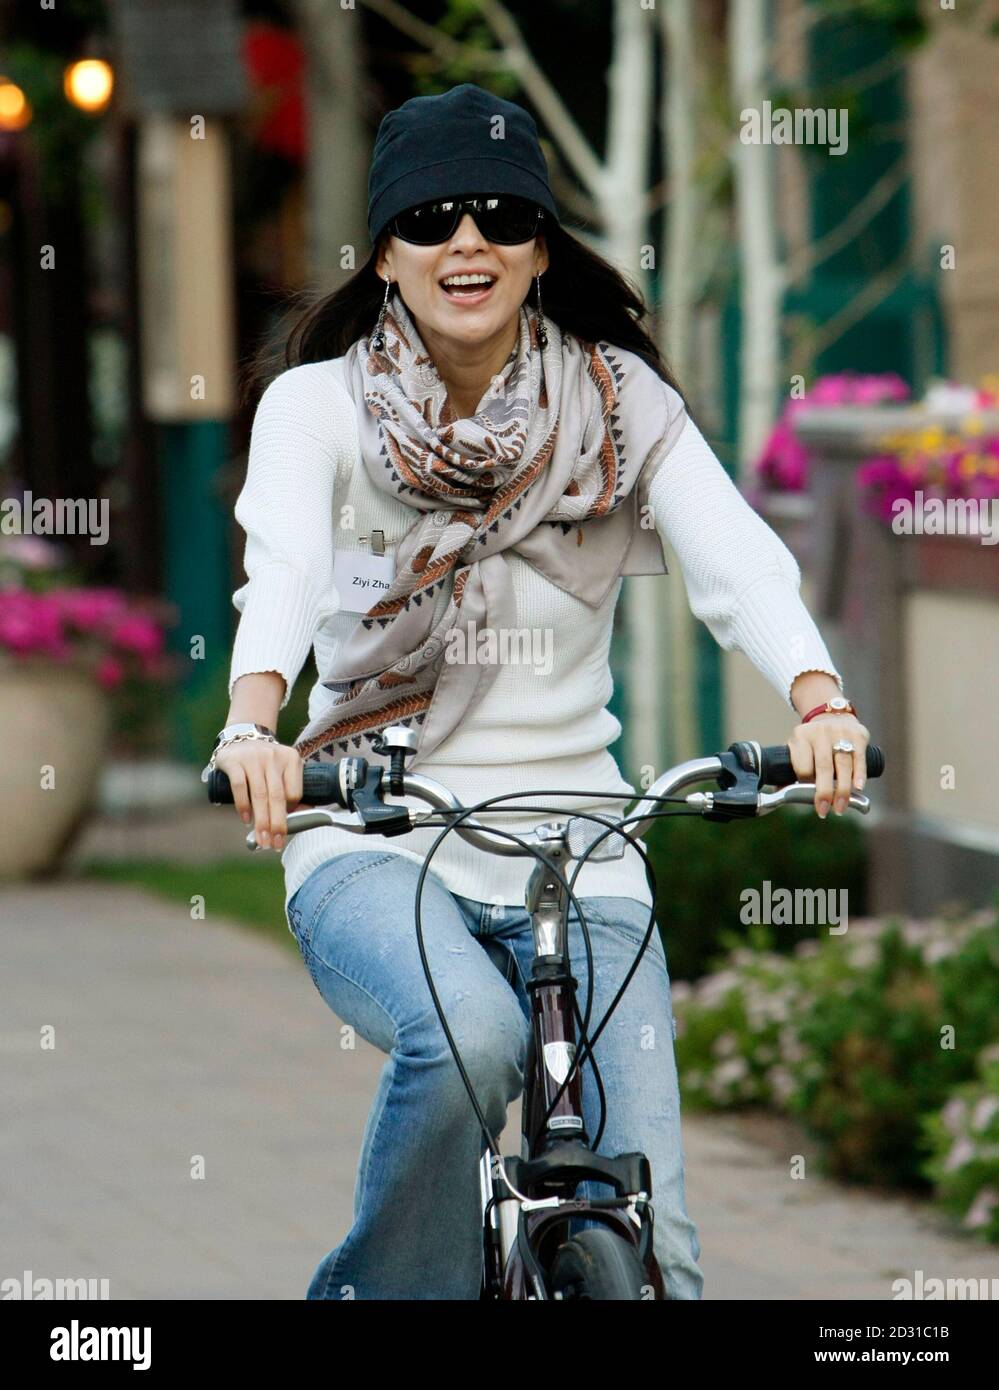 Chinese actress Zhang Ziyi arrives for the morning session at the 26th annual Allen & Co conference in Sun Valley, Idaho, July 11, 2008. REUTERS/Rick Wilking (UNITED STATES) Stock Photo